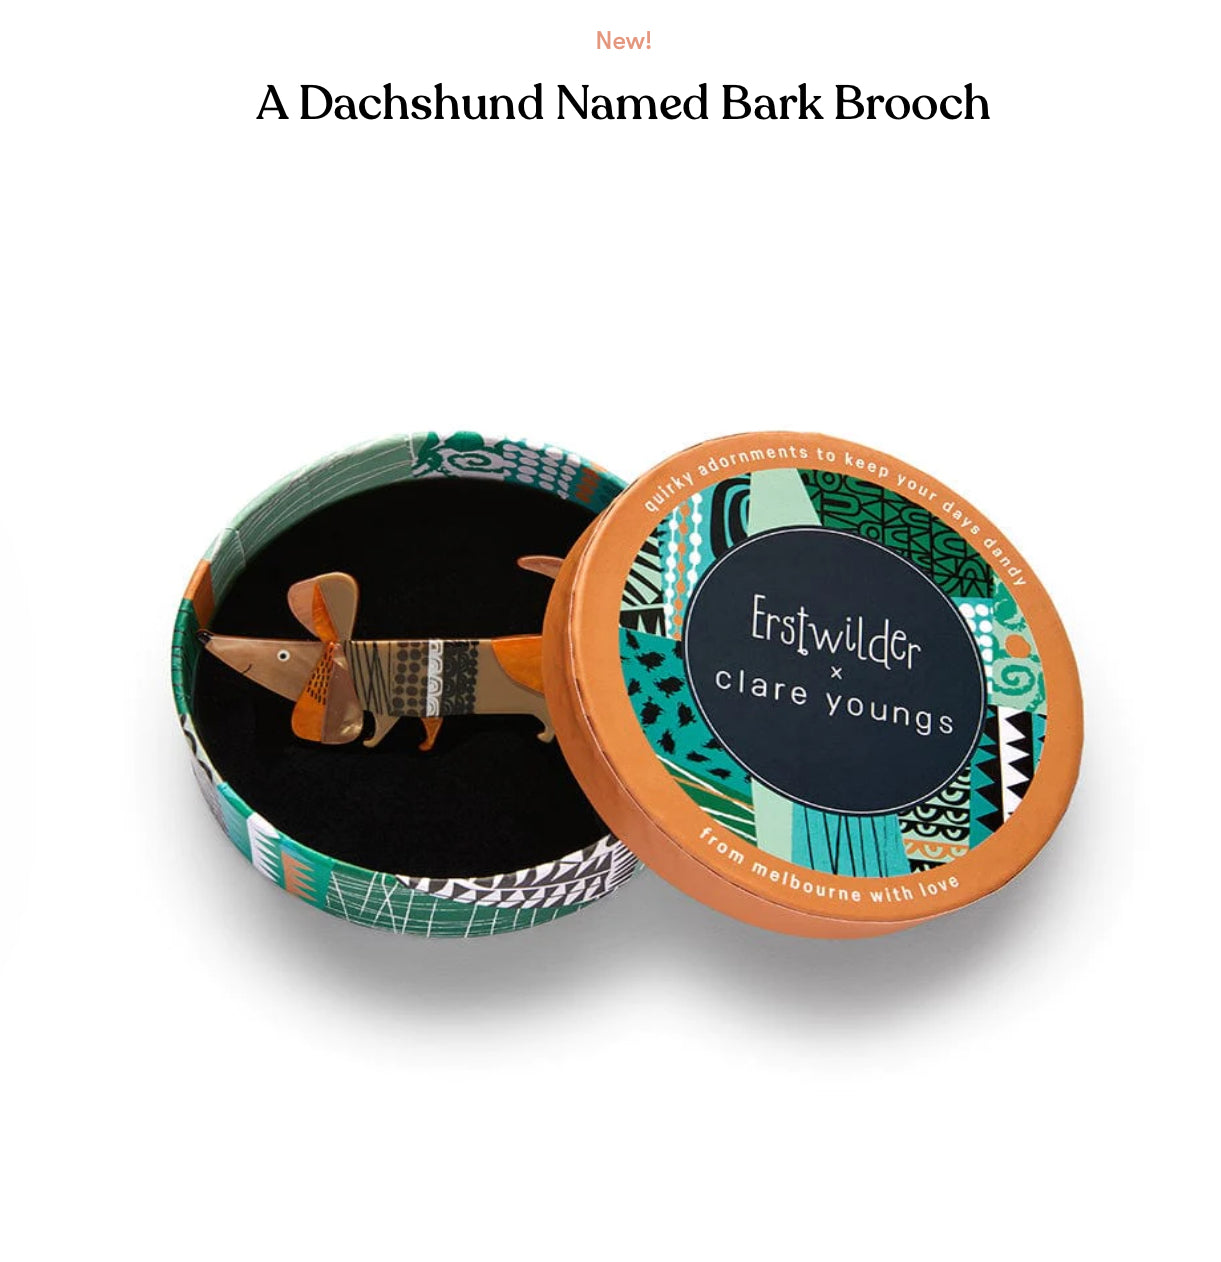 A Dachshund Named Bark Brooch (2024) by Erstwilder and Clare Youngs